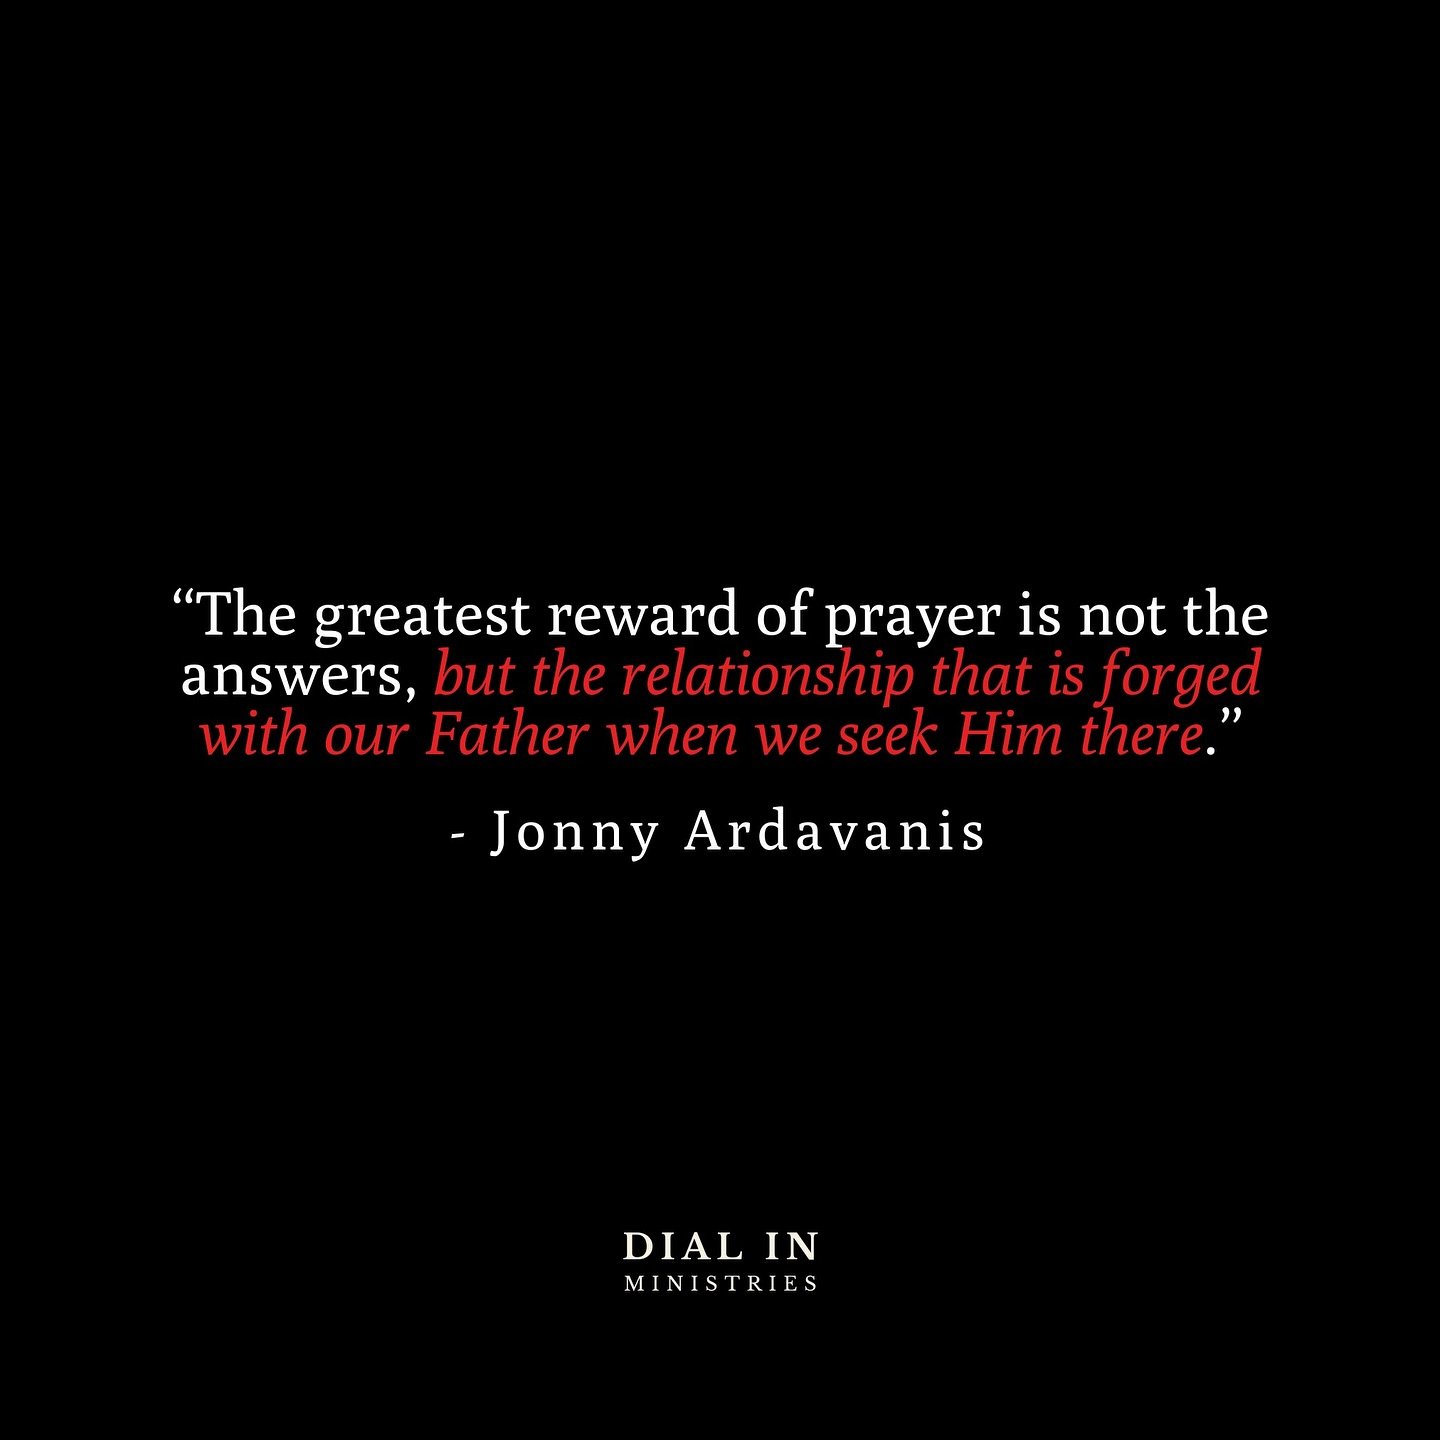 &ldquo;The greatest reward of prayer is not the answers, but the relationship that is forged with our Father when we seek Him there.&rdquo; @jonnyardavanis